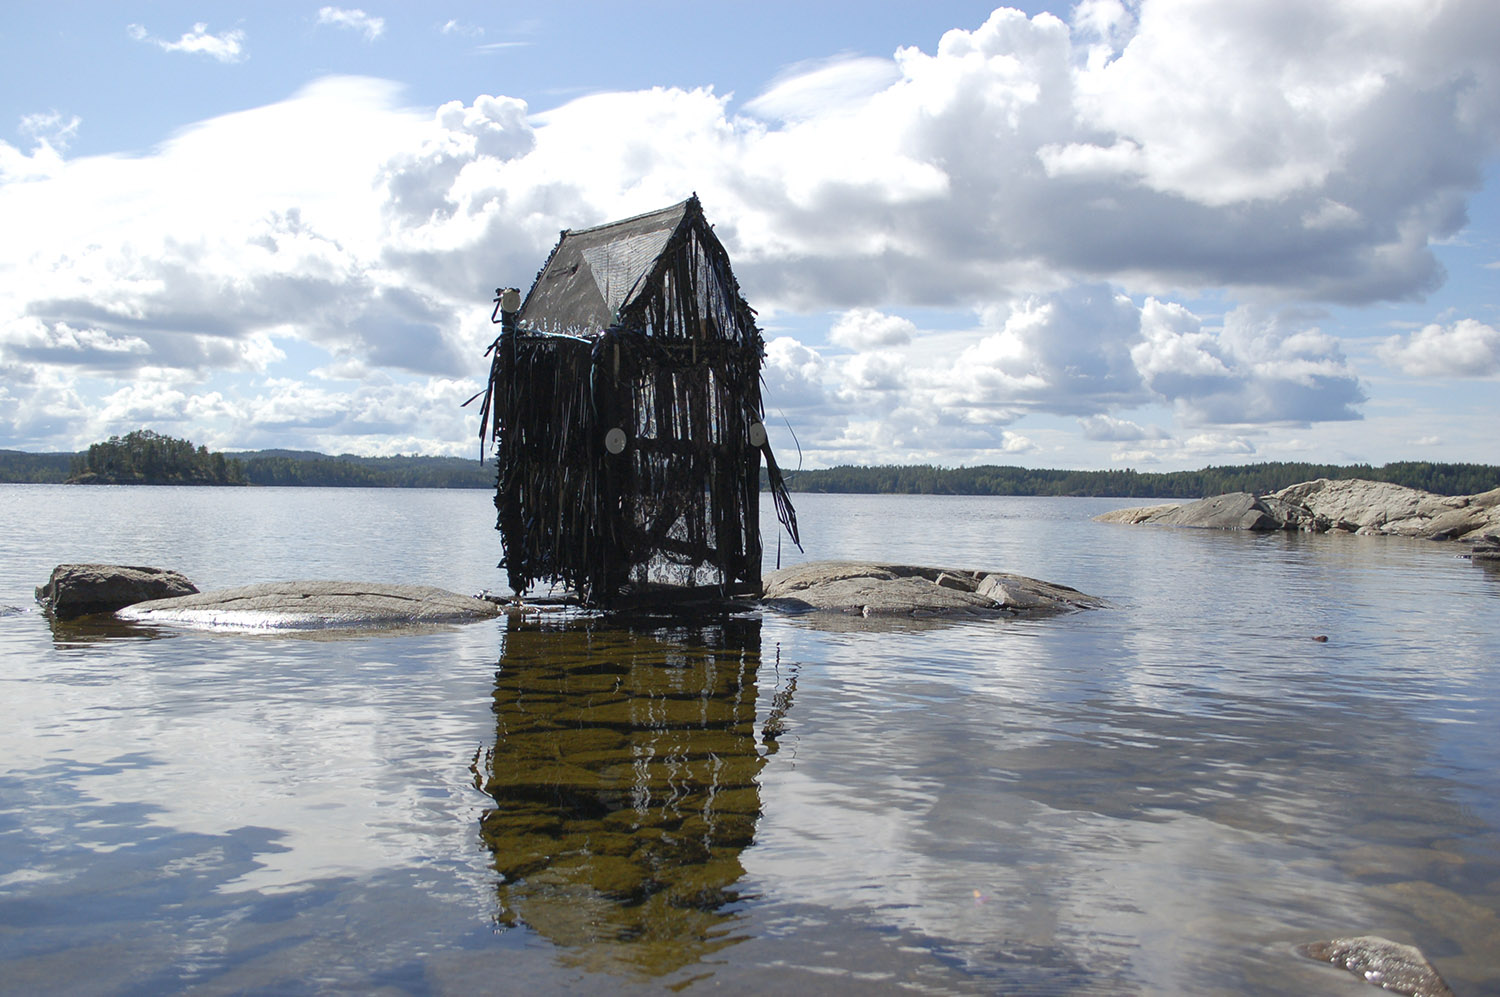 A photograph of a skeletal desolate shack on a small rock in the middle of an expanse of calm water.